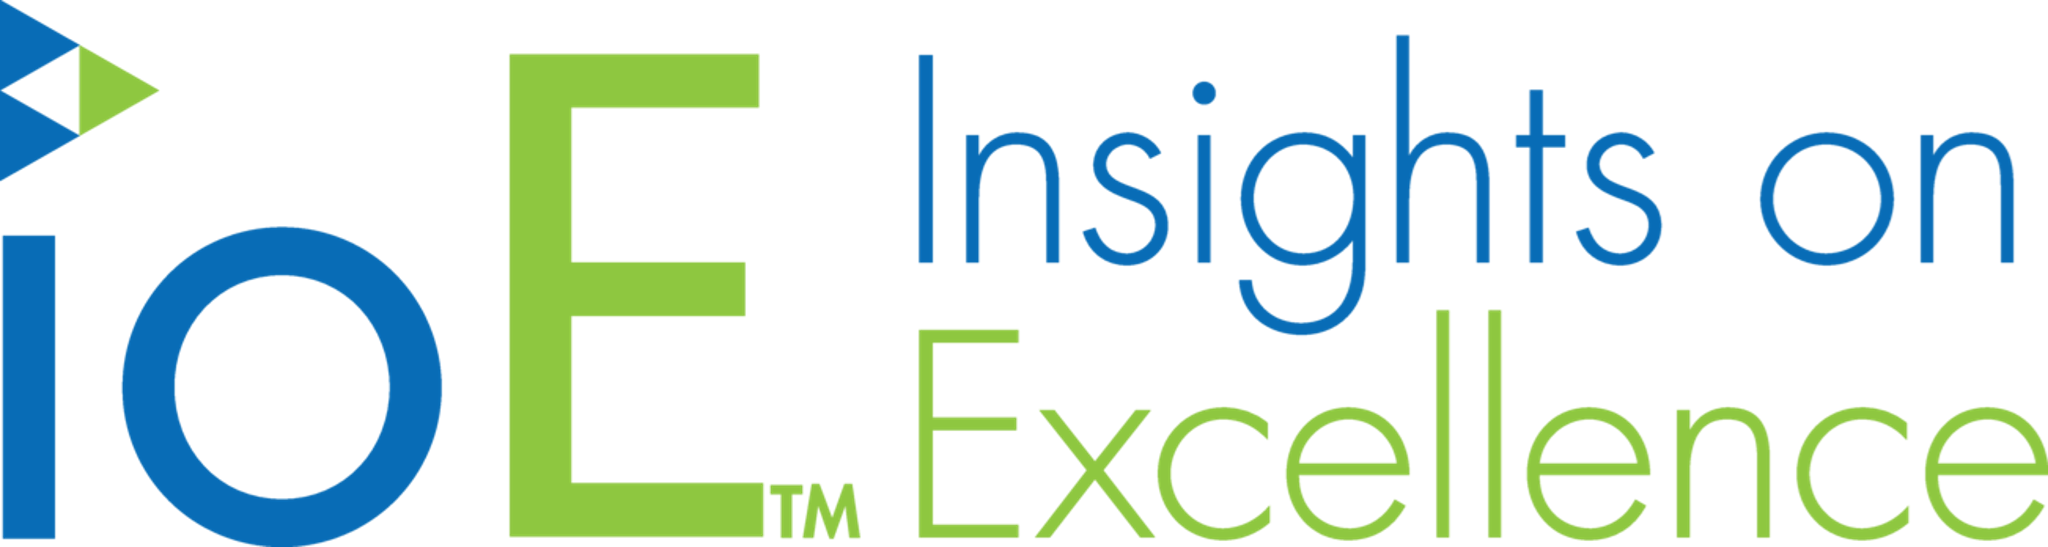 Insights on Excellence (IOE) logo